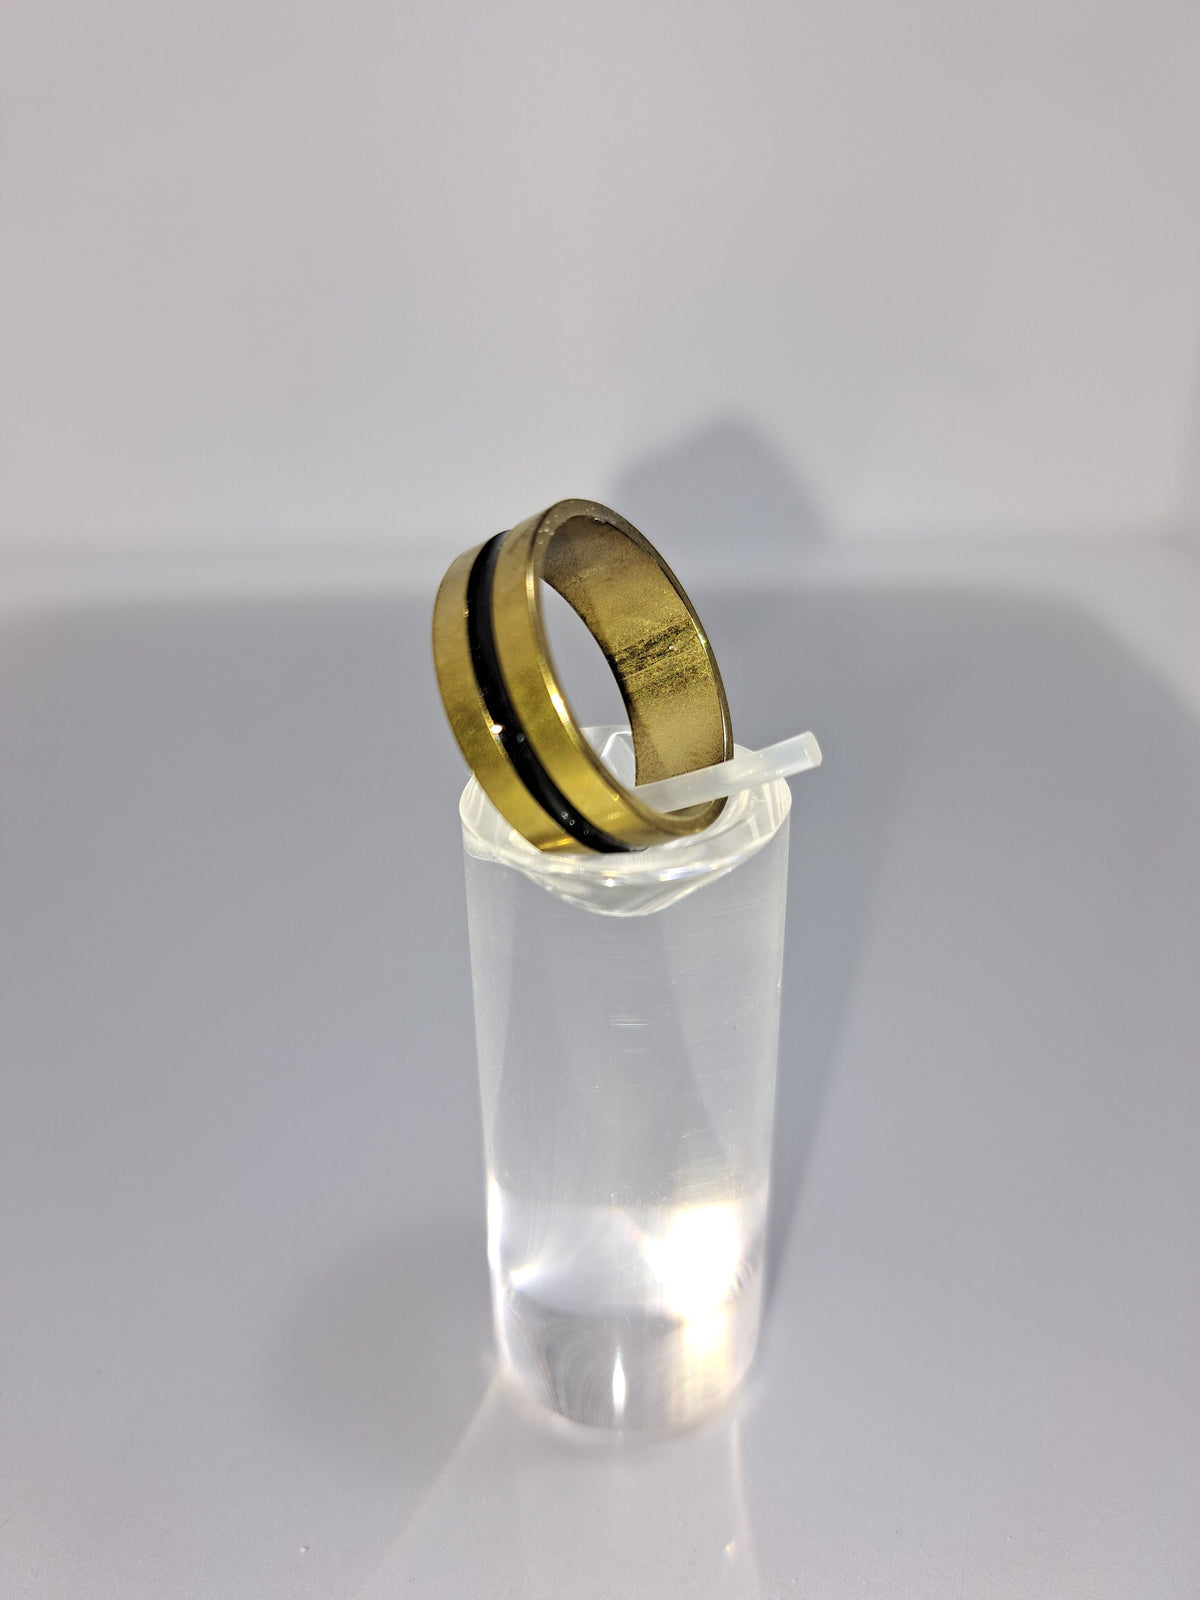 Gold stainless steel unisex ring with a black rounded channel around the band. Perfect costume jewellery.